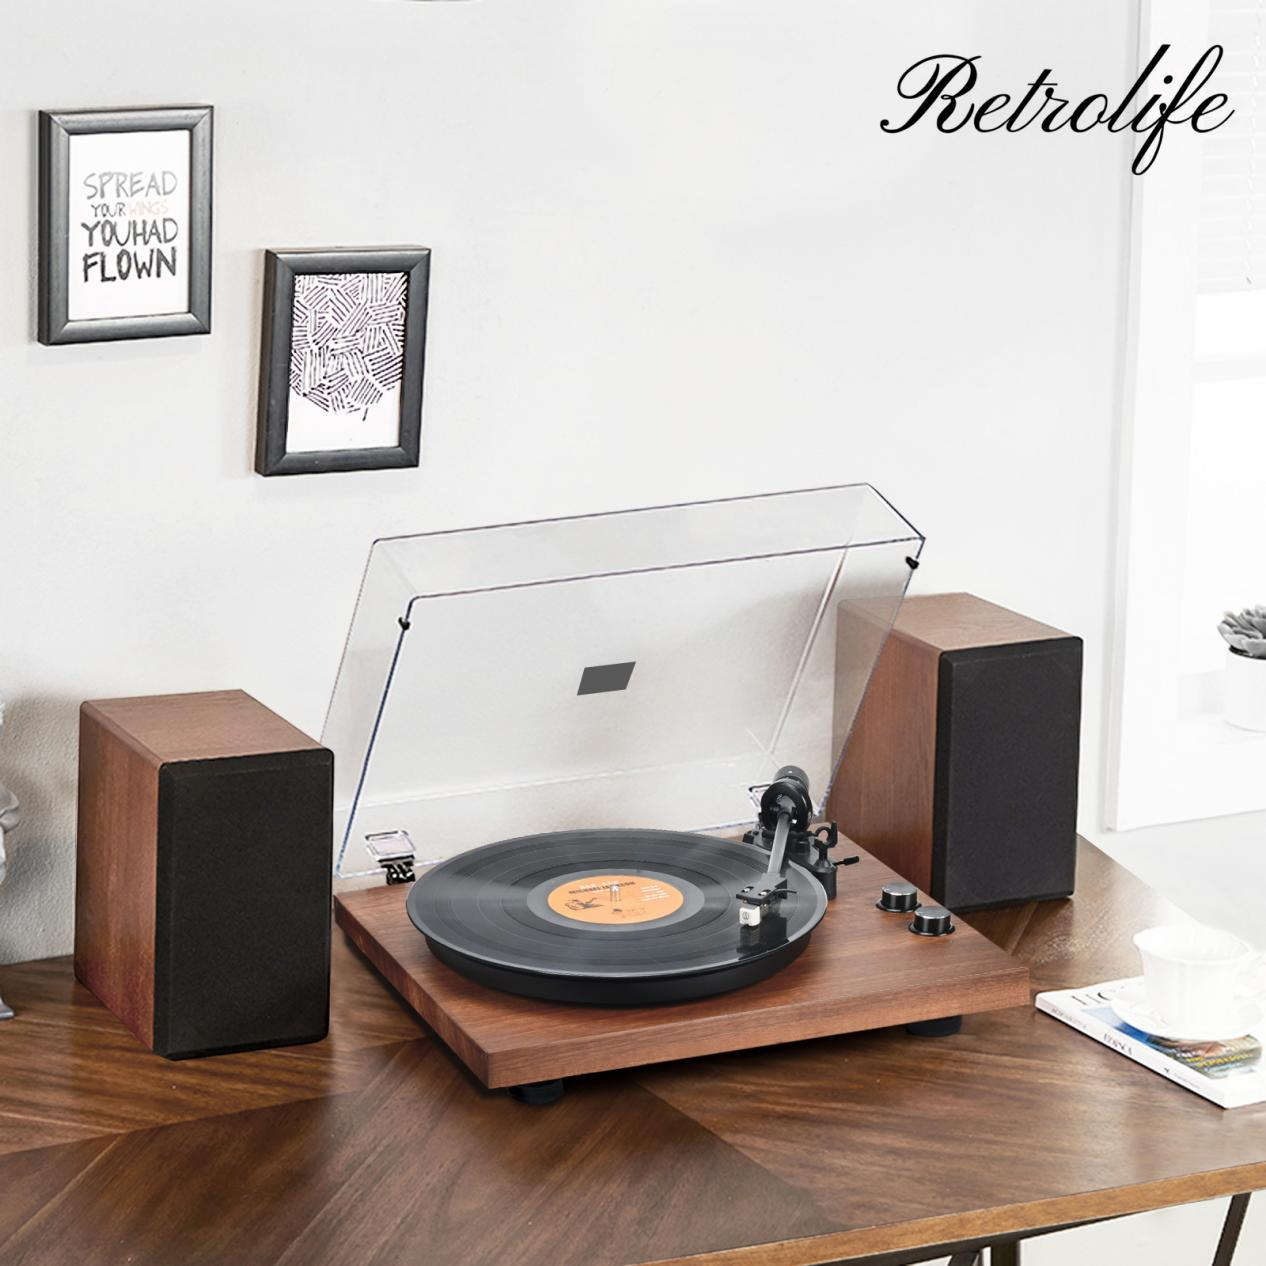 Retrolife: Vinyl Player Makes "RETRO" Style Music Available to Everyone